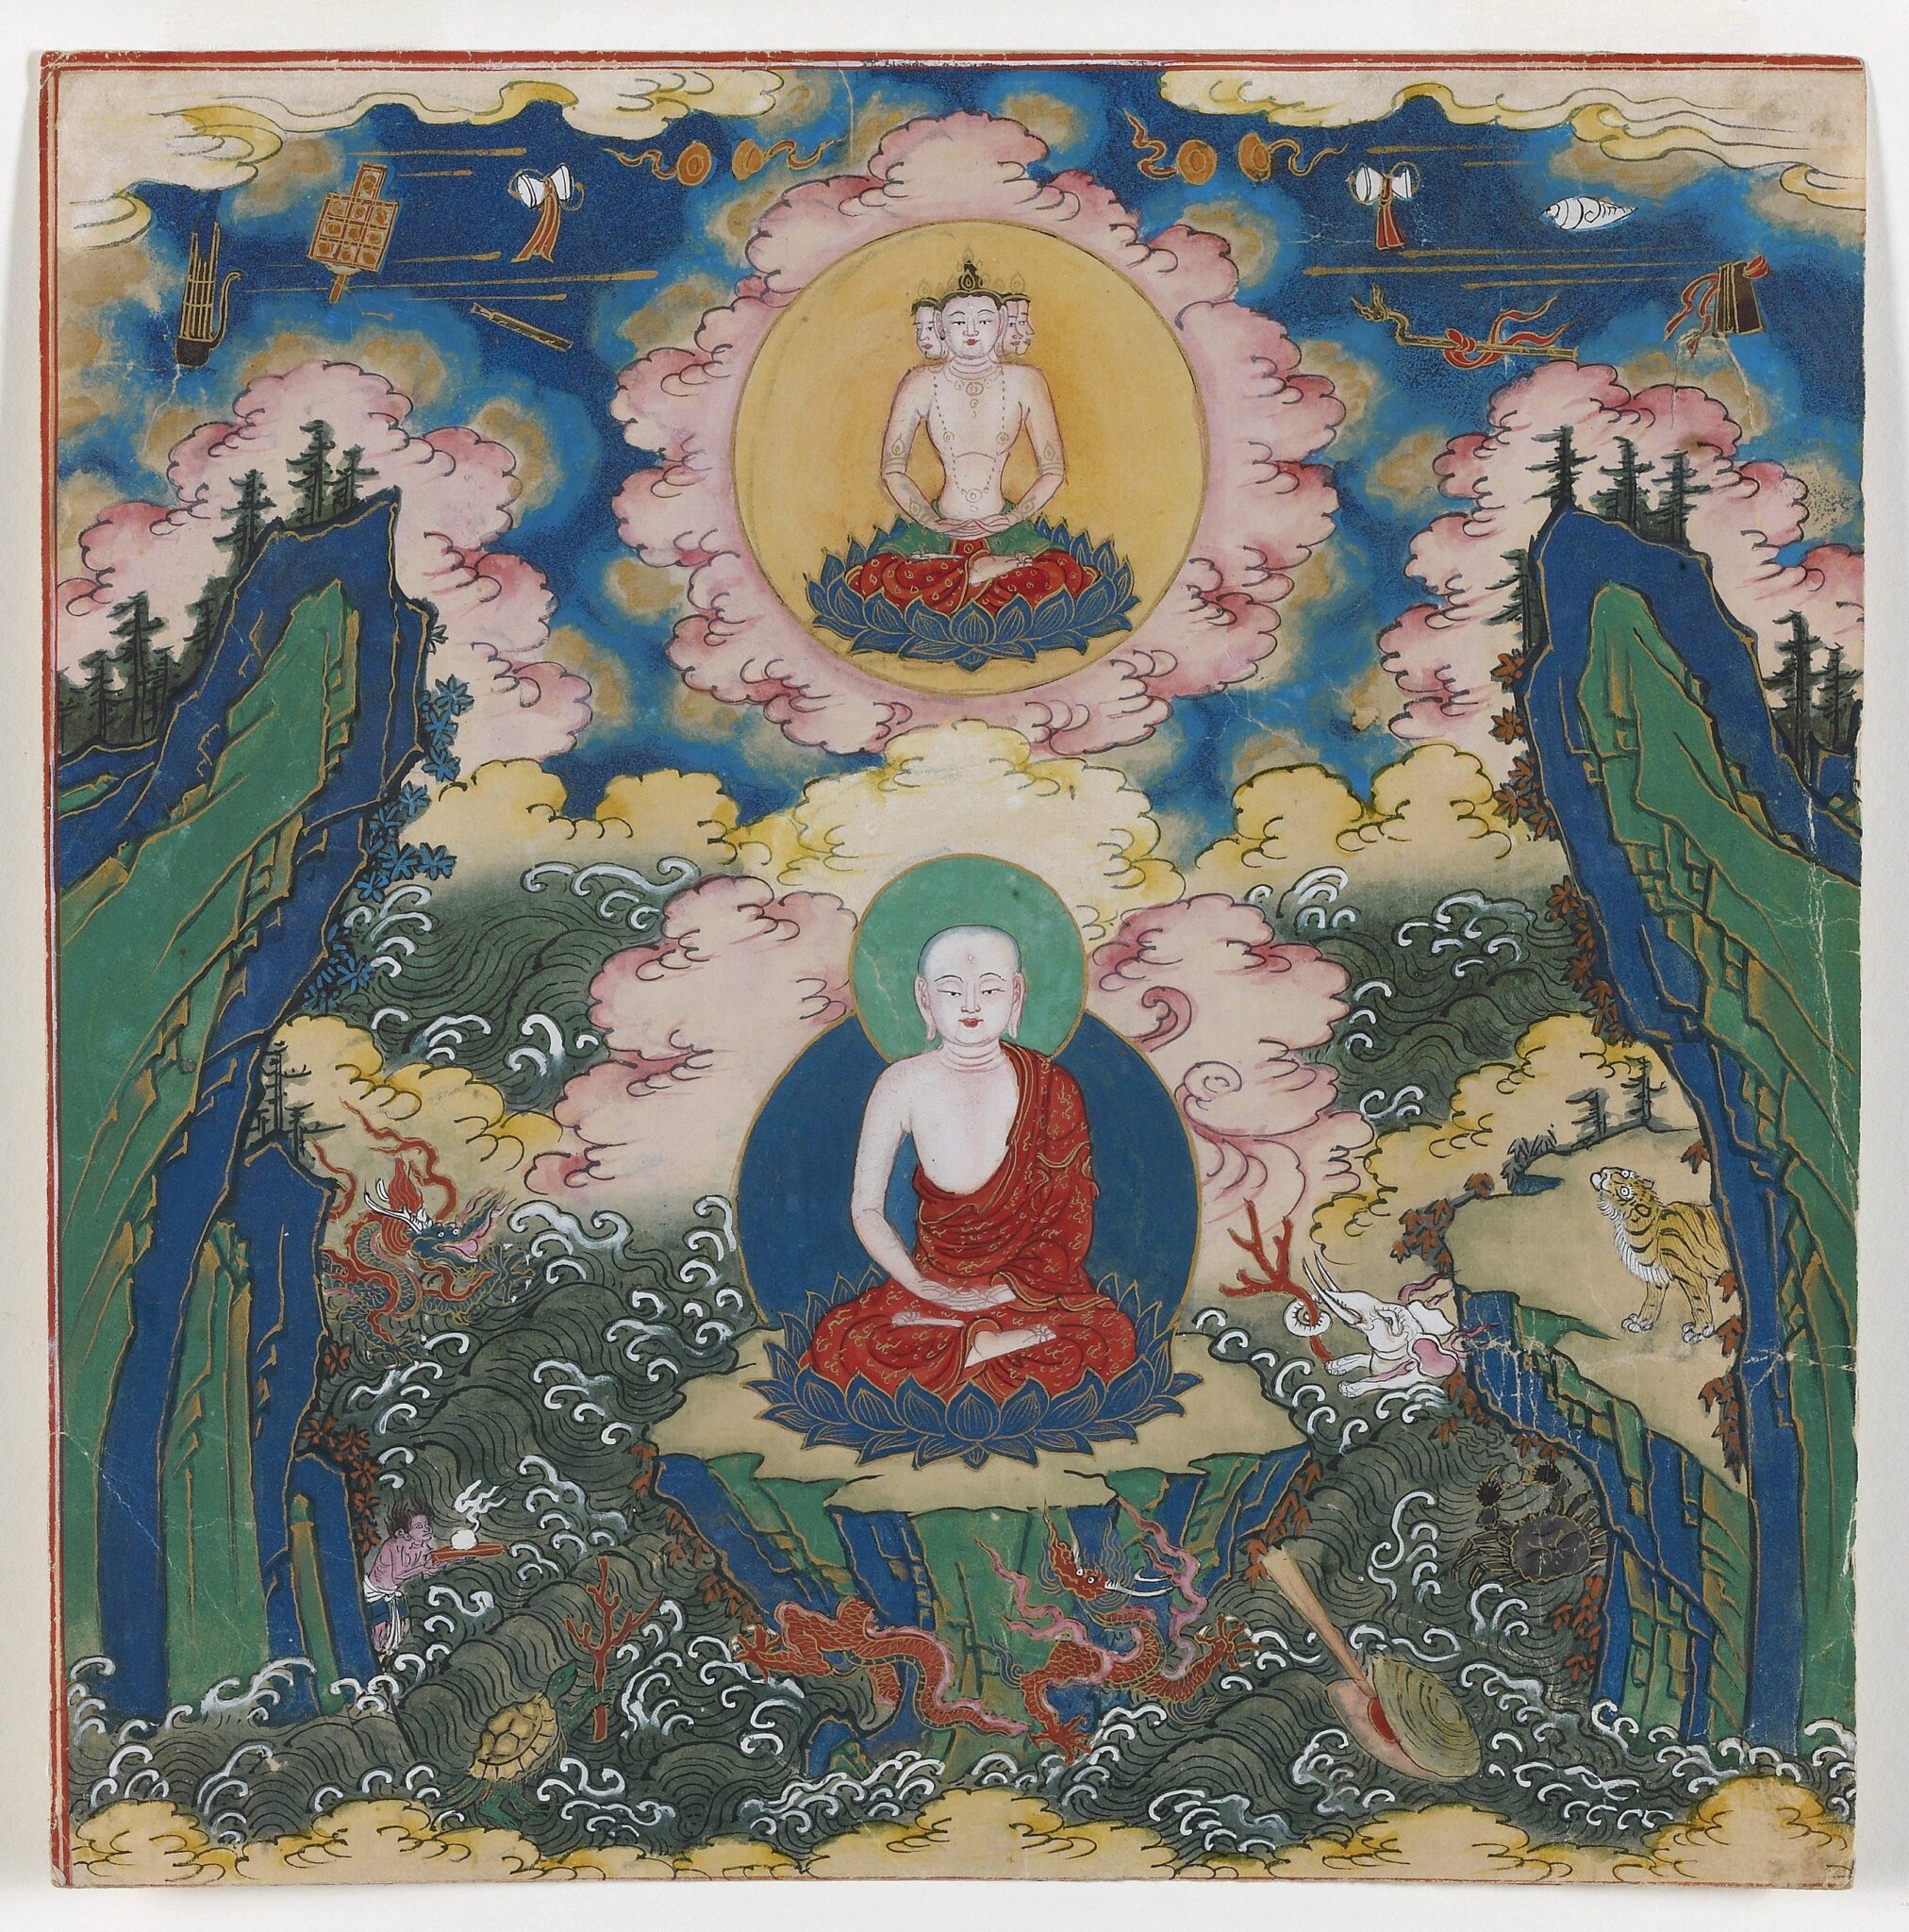 Figure wearing red robe seated in meditation within rocky landscape underneath three-headed deity in roundel